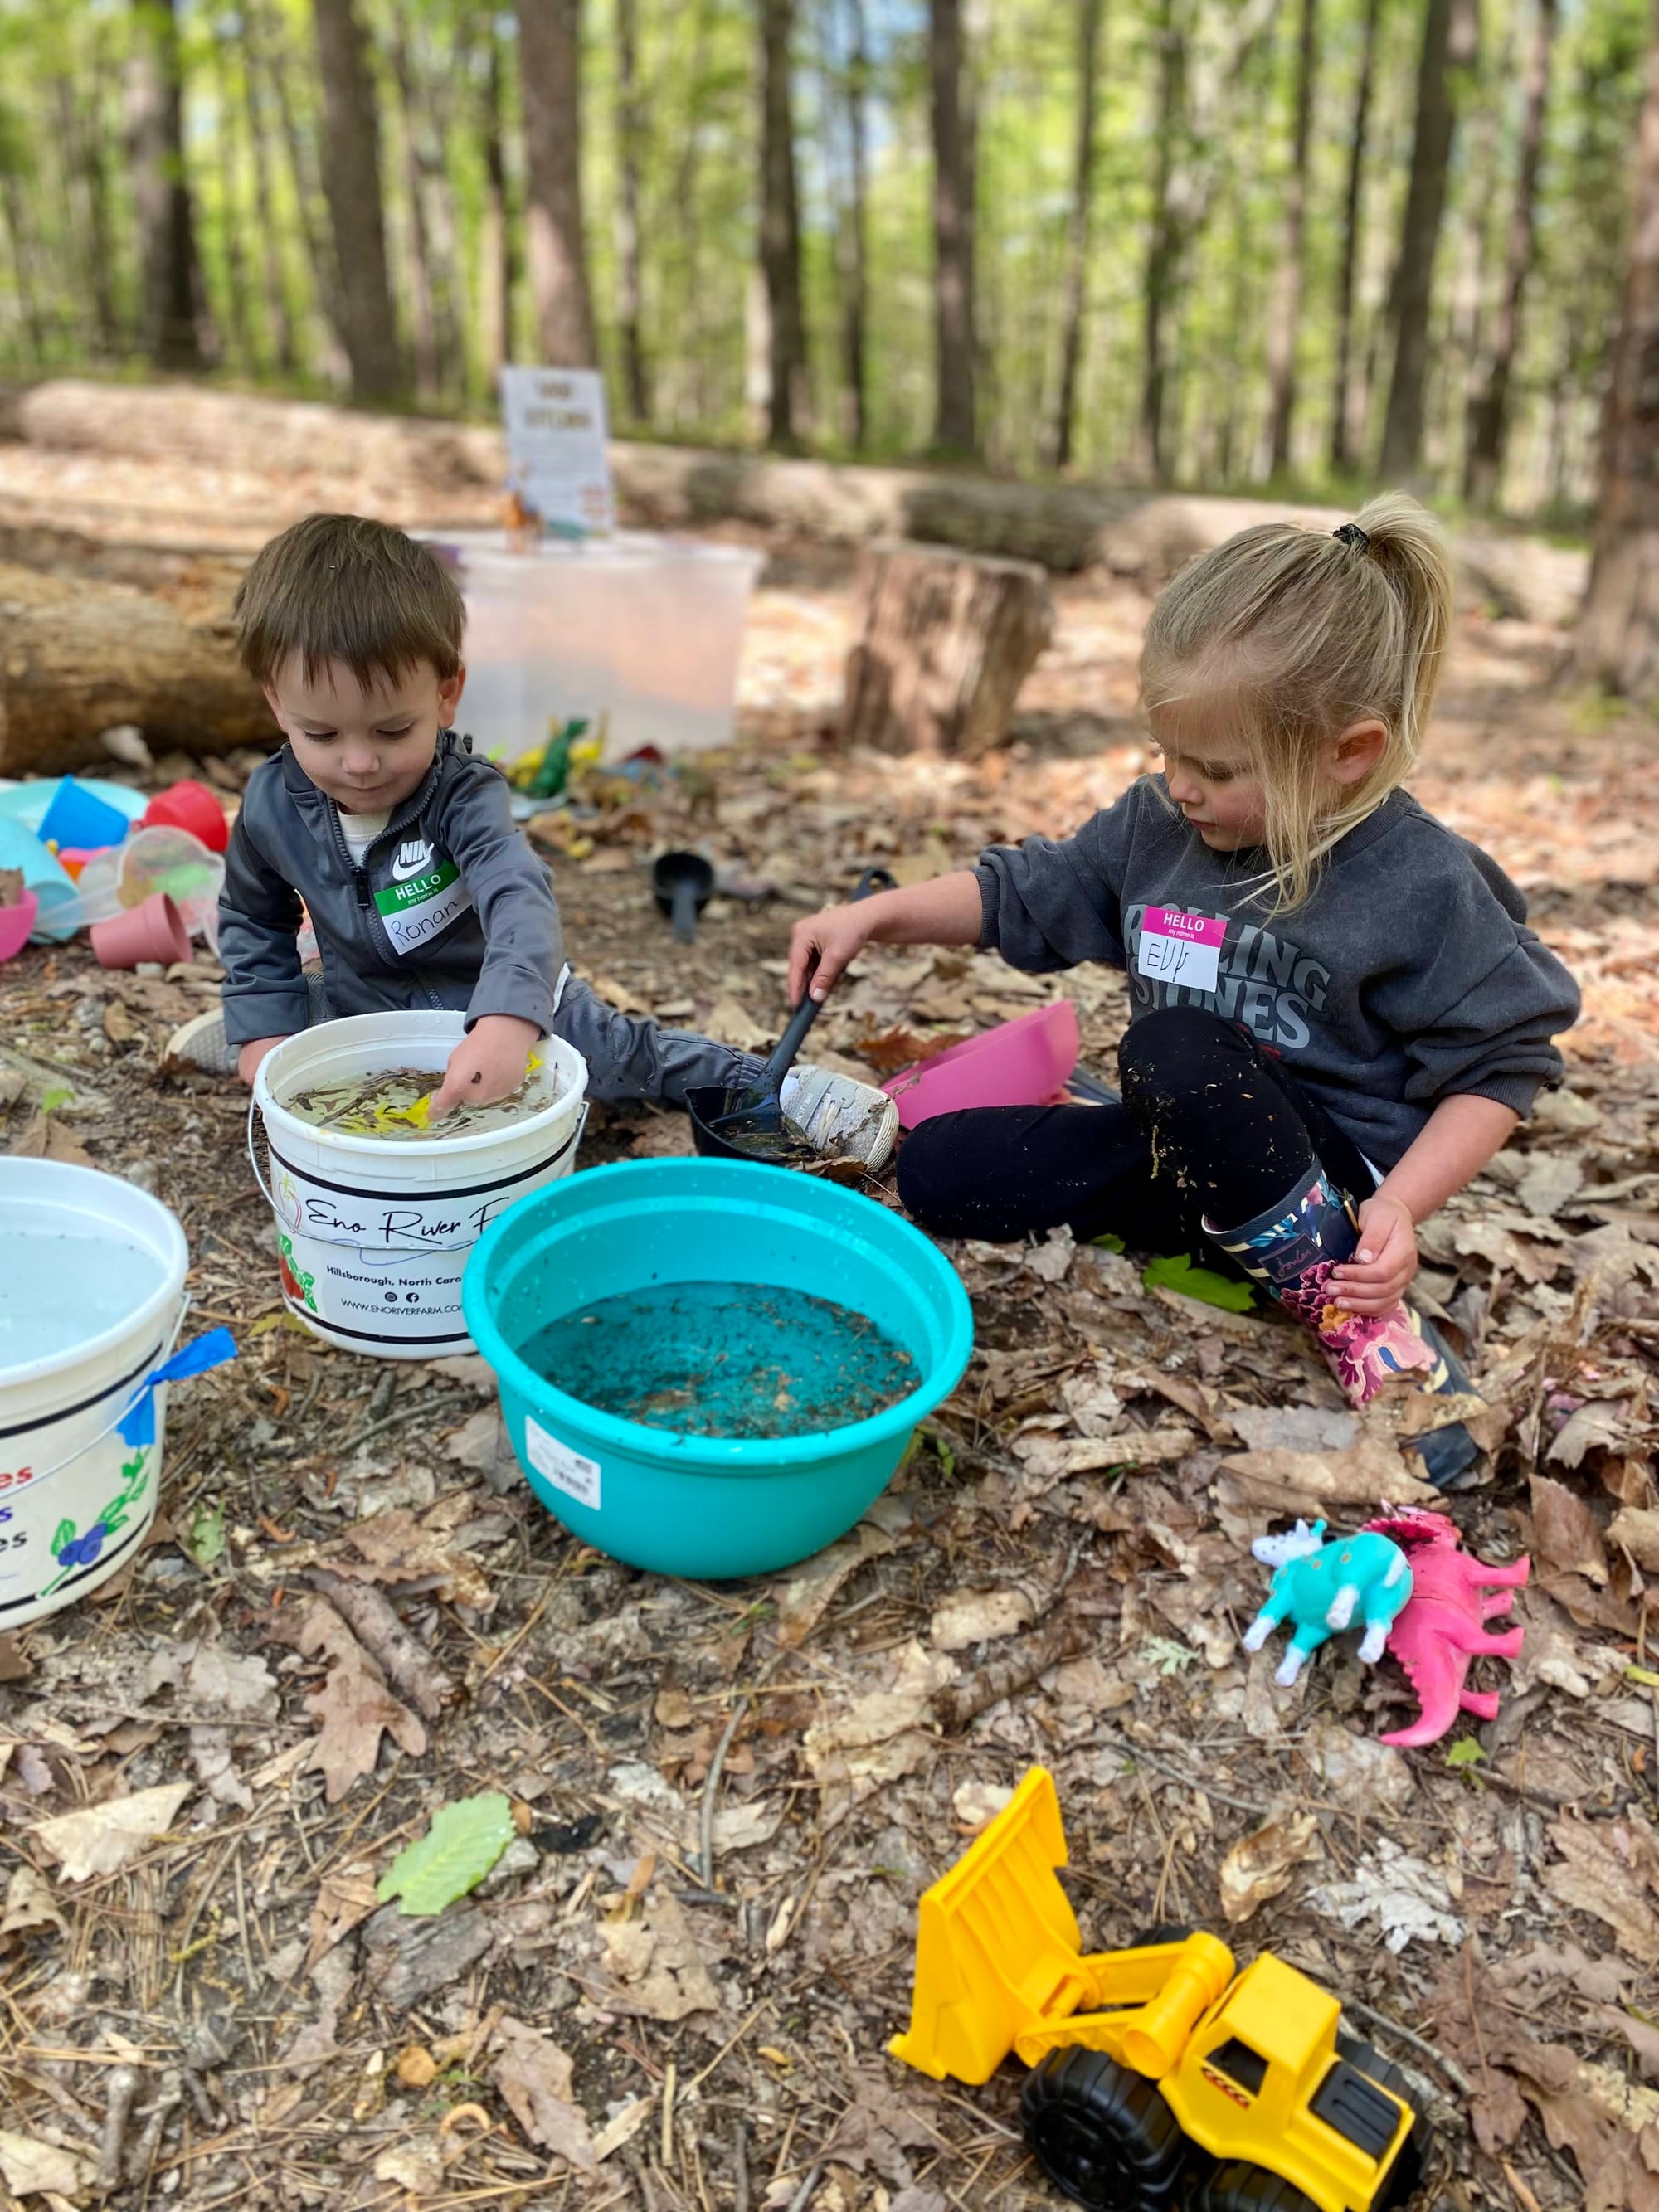 (Image: Two young children sitting in the leaves and dirty playing with buckets of water and scoopers with other toys scattered around them)